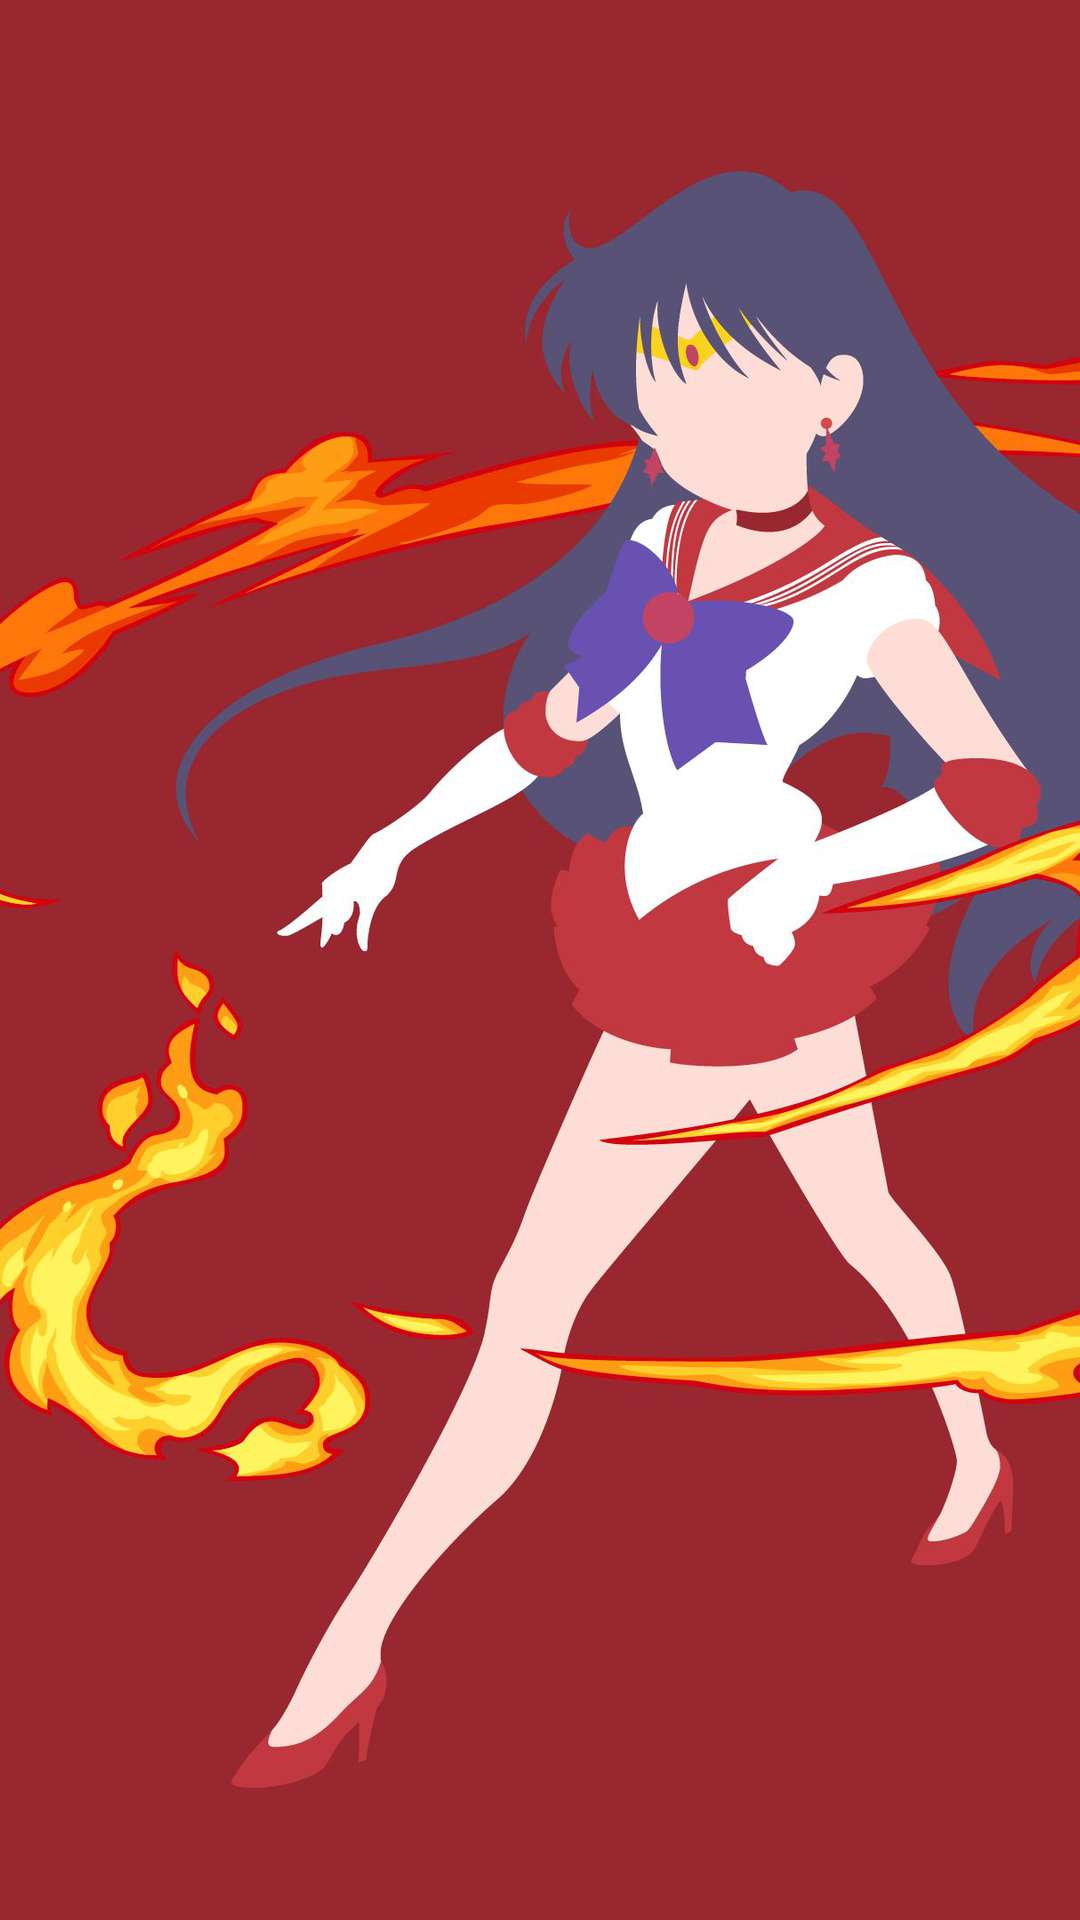 20 Minimalist Anime Wallpapers for iPhone and Android by Arthur Thomas